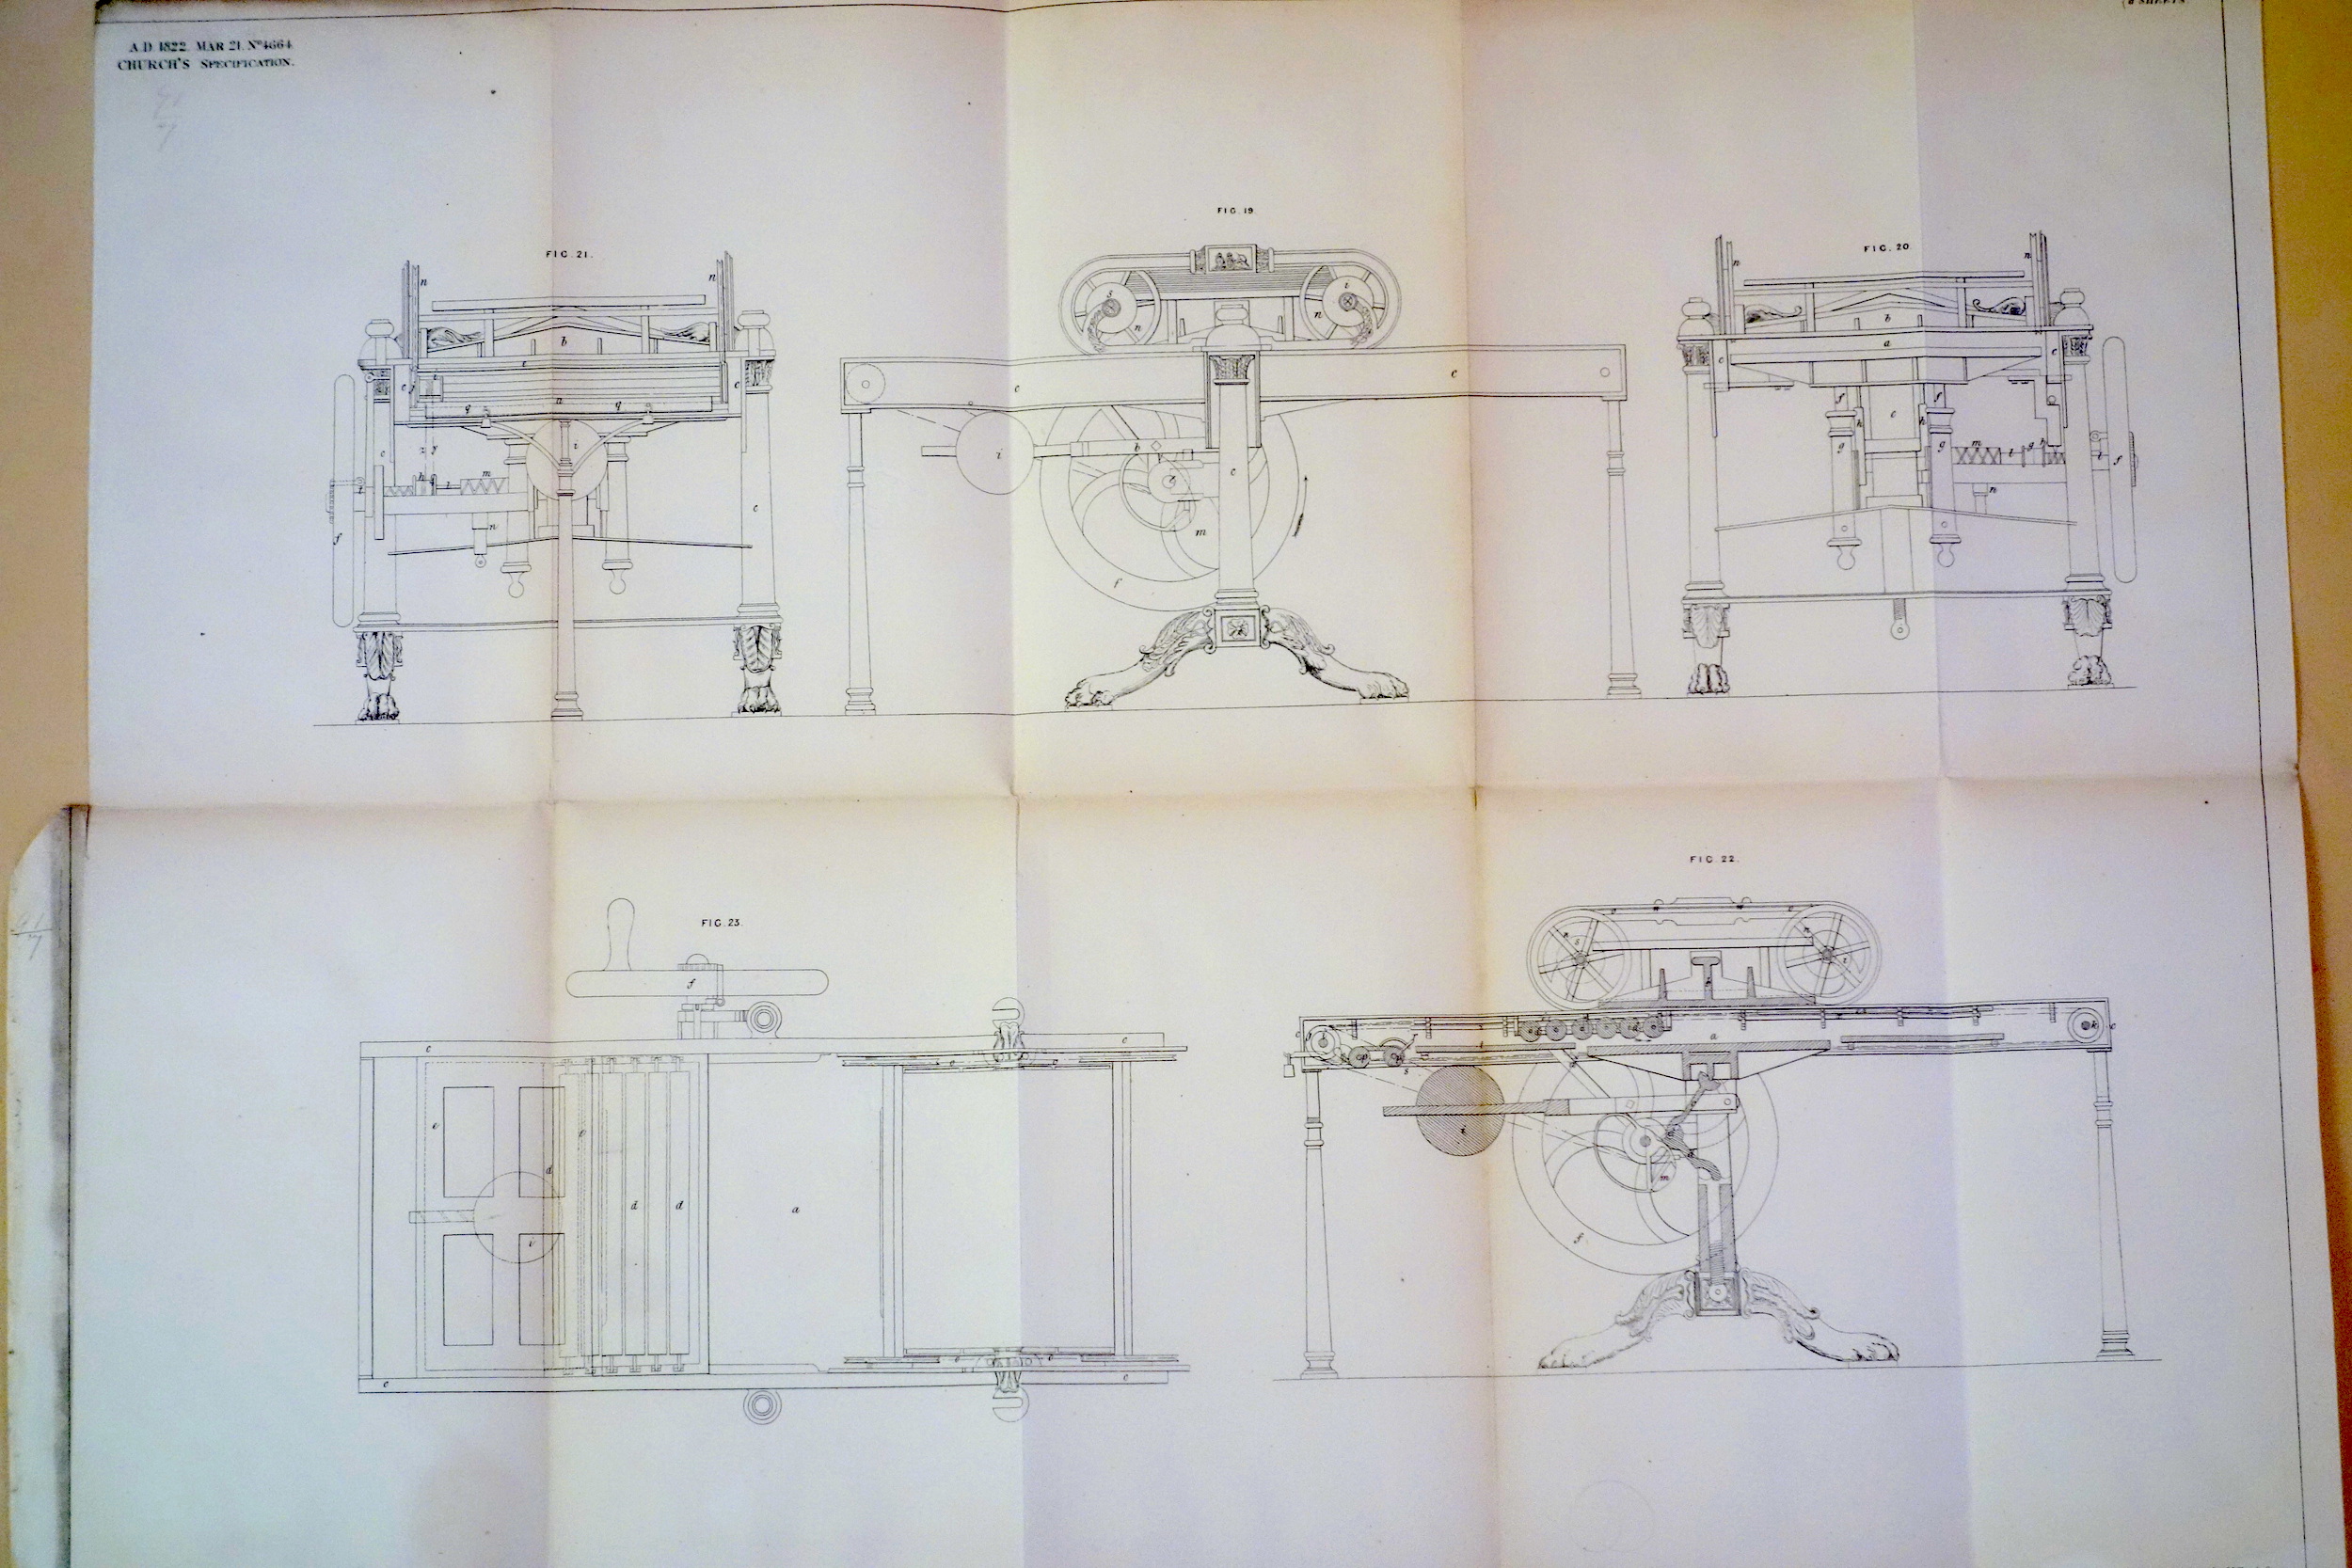 Church printing press drawing from his patent